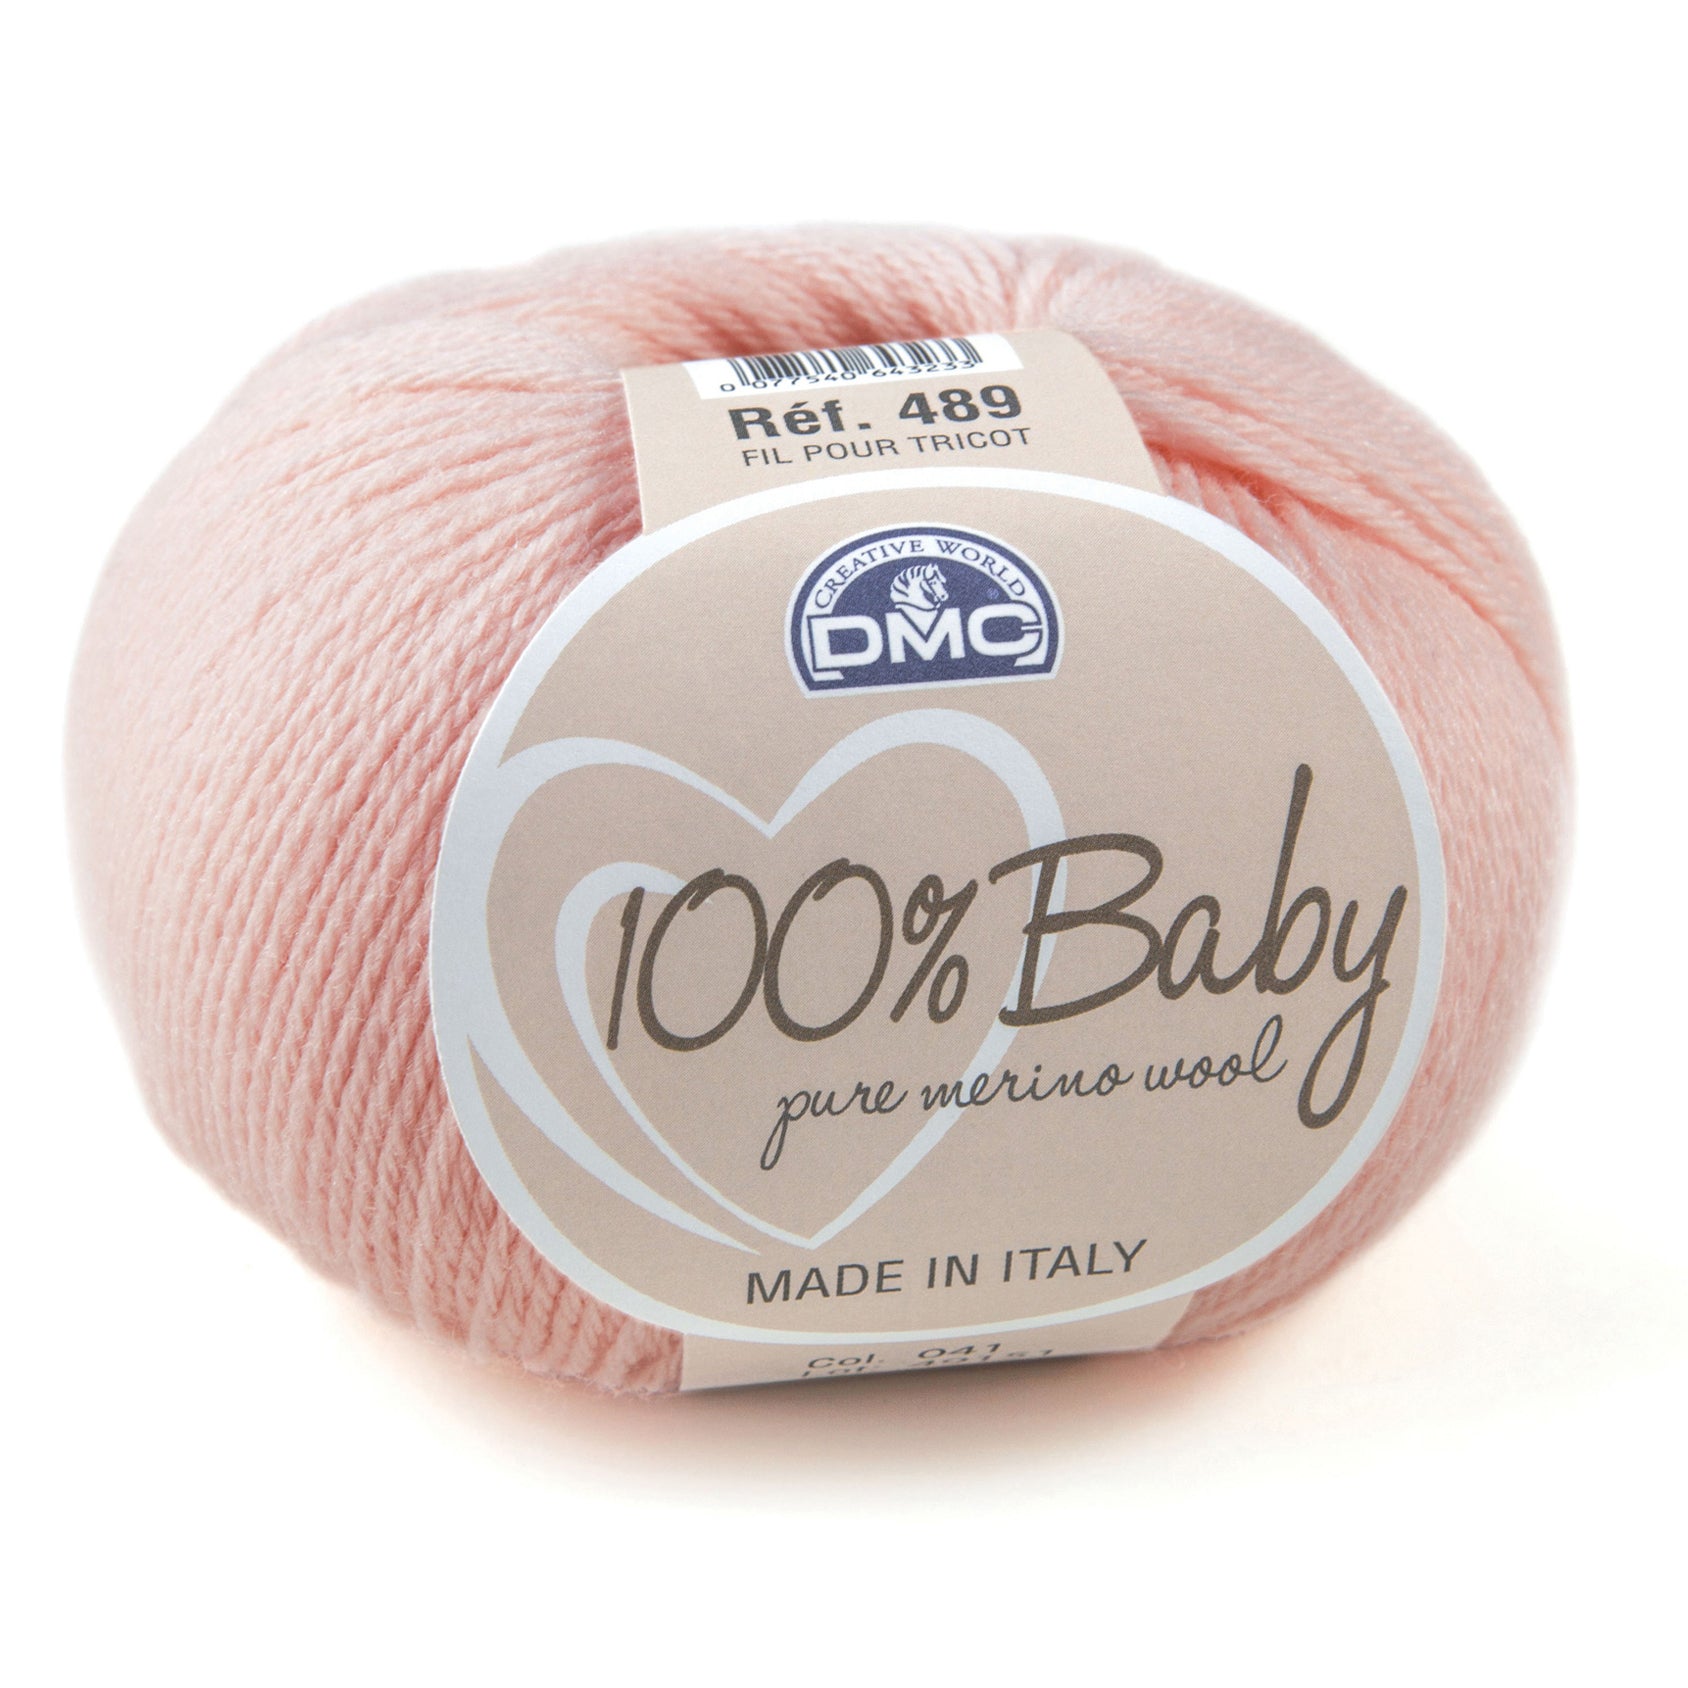 DMC 100% Baby Wool - Softness and Warmth in Every Stitch